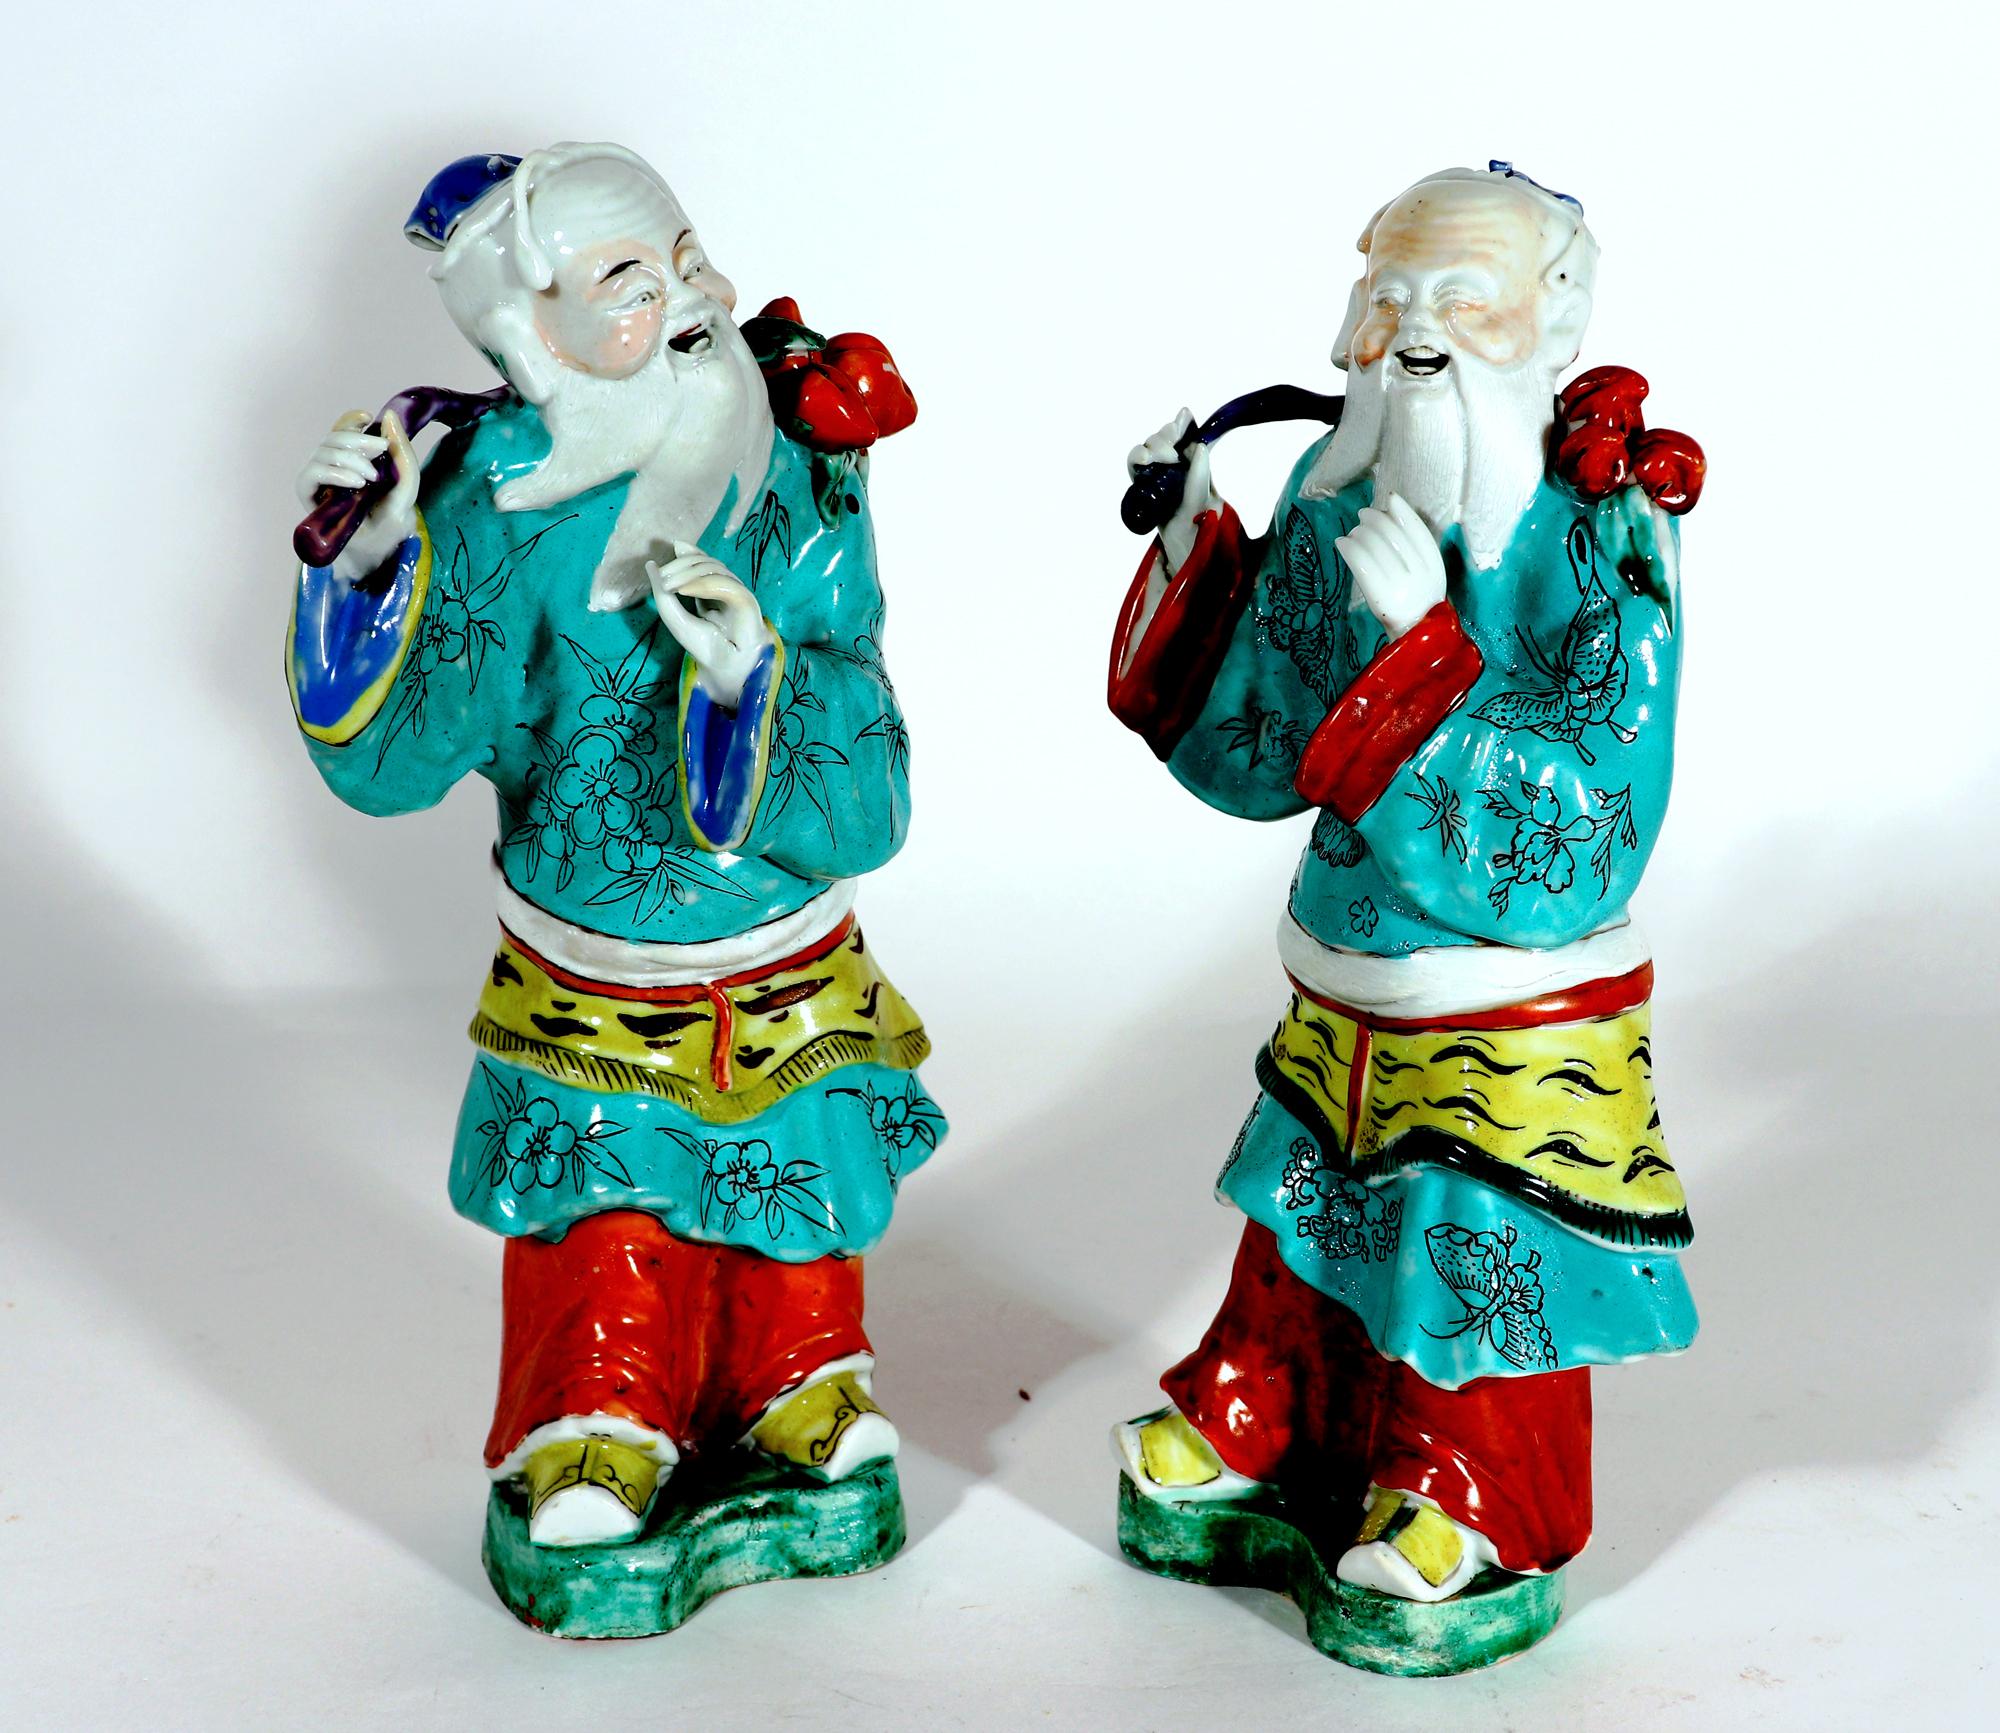 Chinese export porcelain large mythical figures,
Probably of Shouxing, God of Longevity
Circa 1775

The two Chinese Export figures stand on green shaped bases and although they are the same subject, they are modeled differently. They have a long